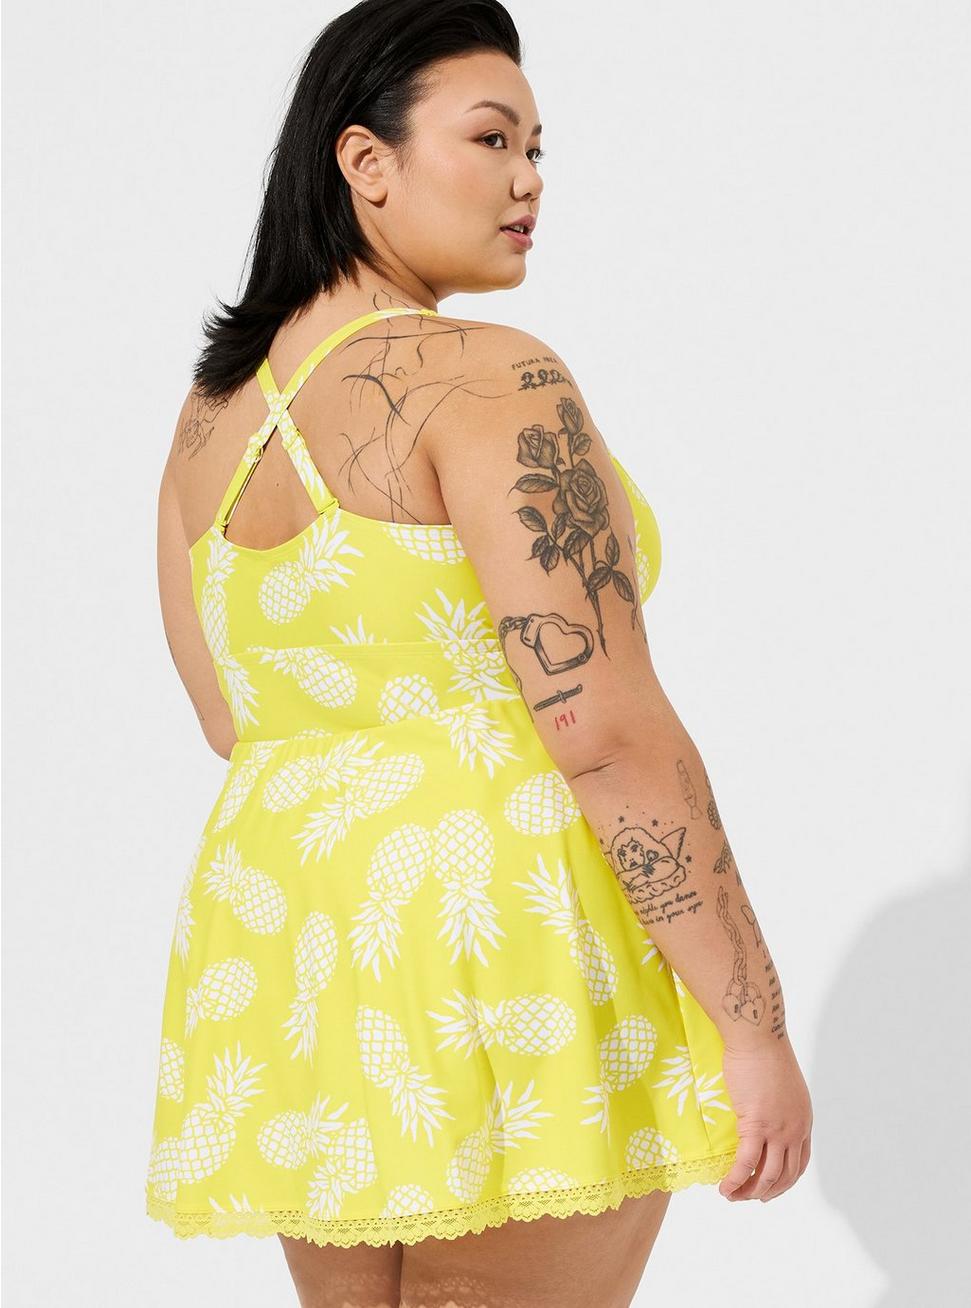 Wireless Mid Lace Trimmed Swim Dress With Brief, GRAPHIC PINEAPPLE, alternate